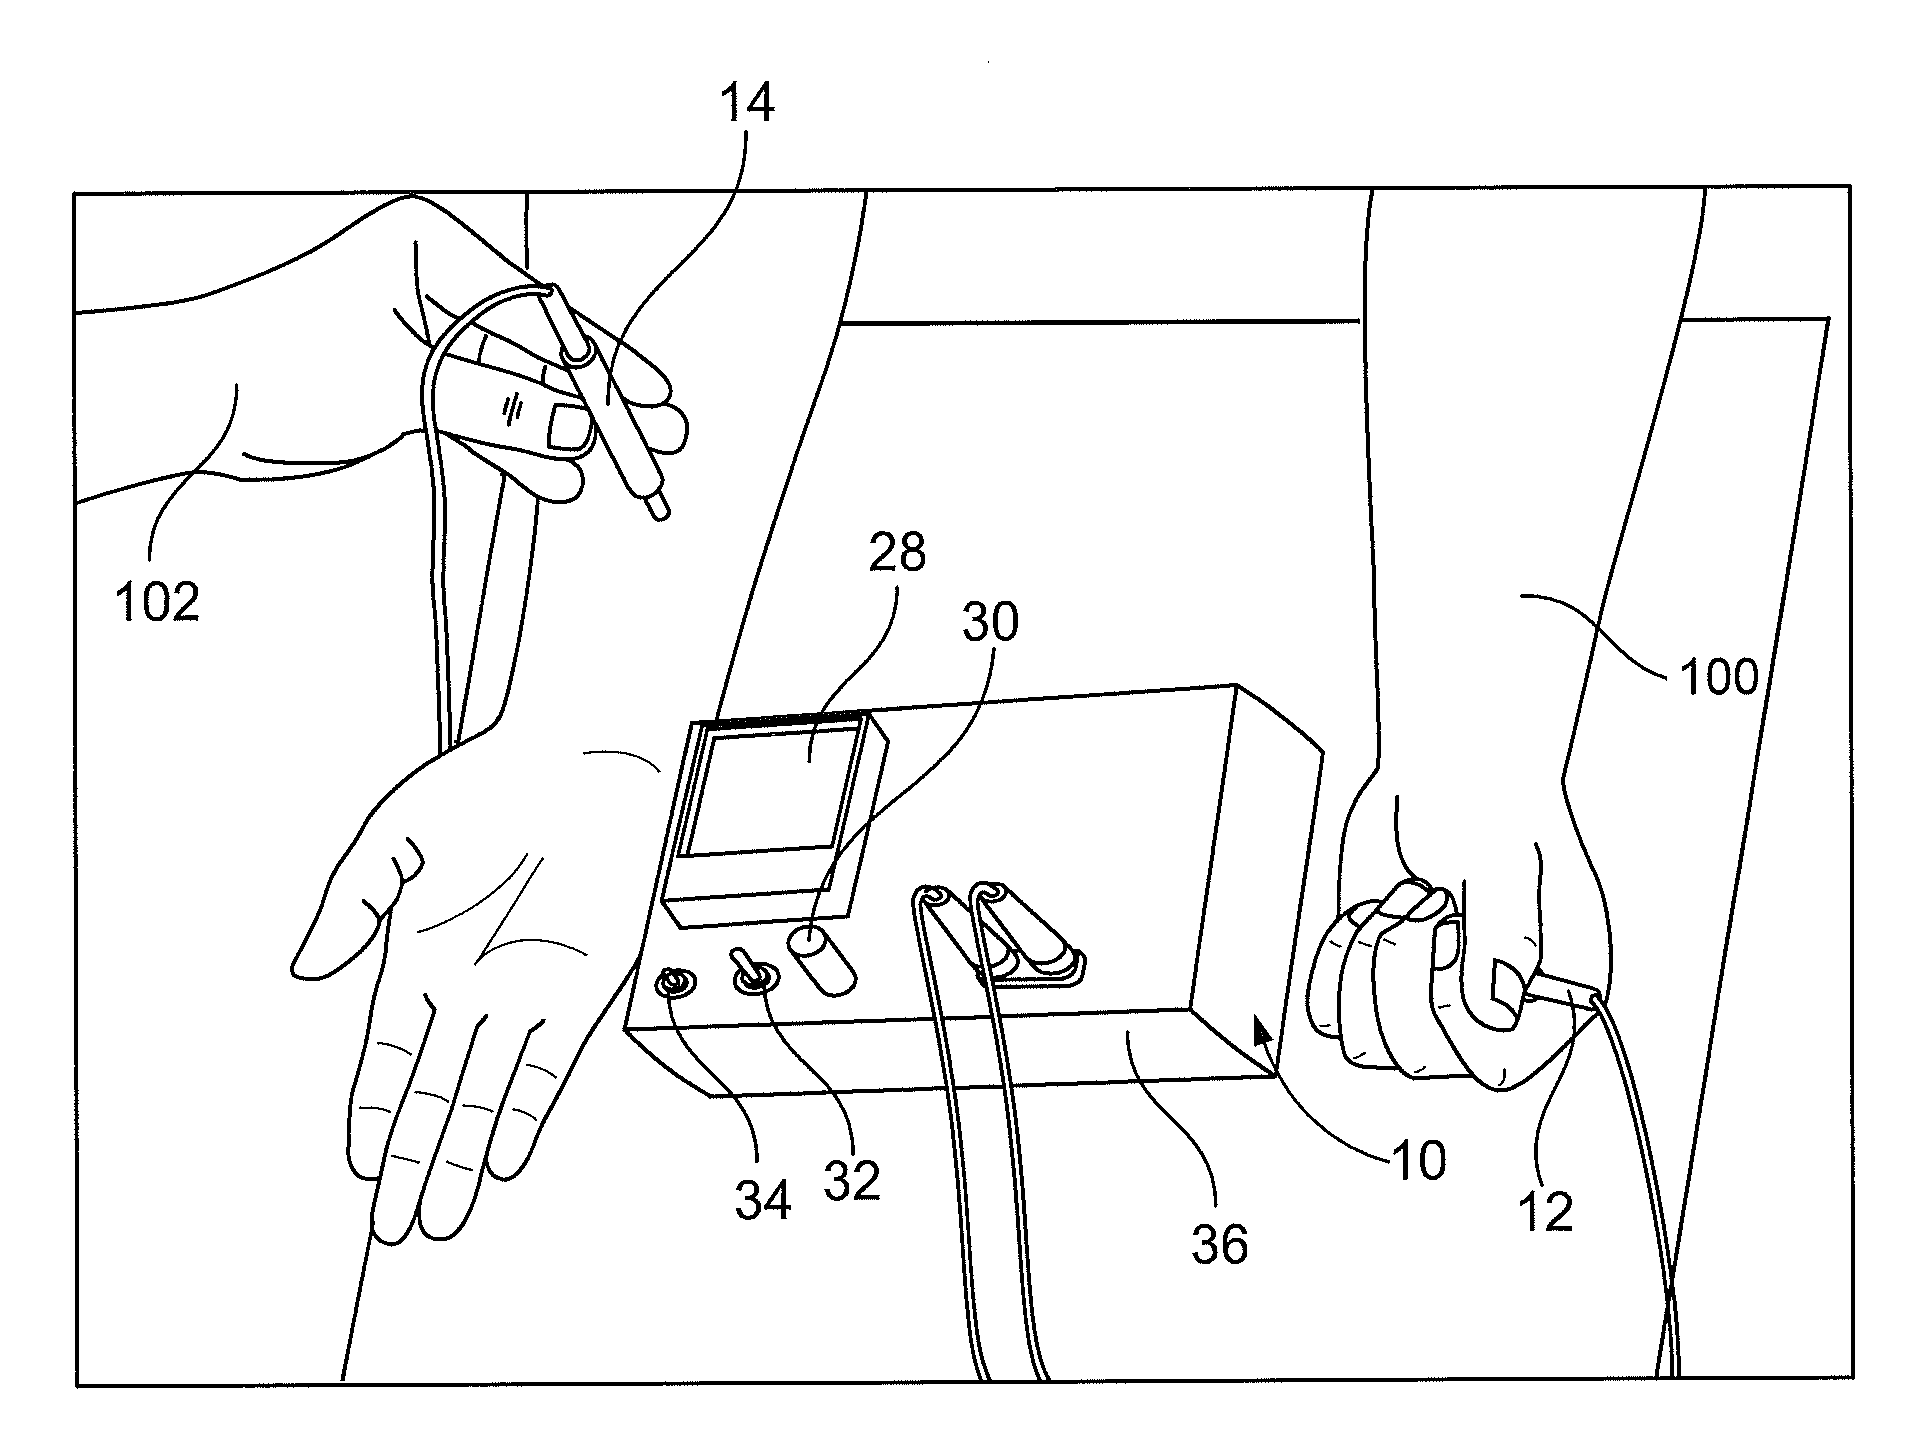 System and methods for assessment of acupuncture points